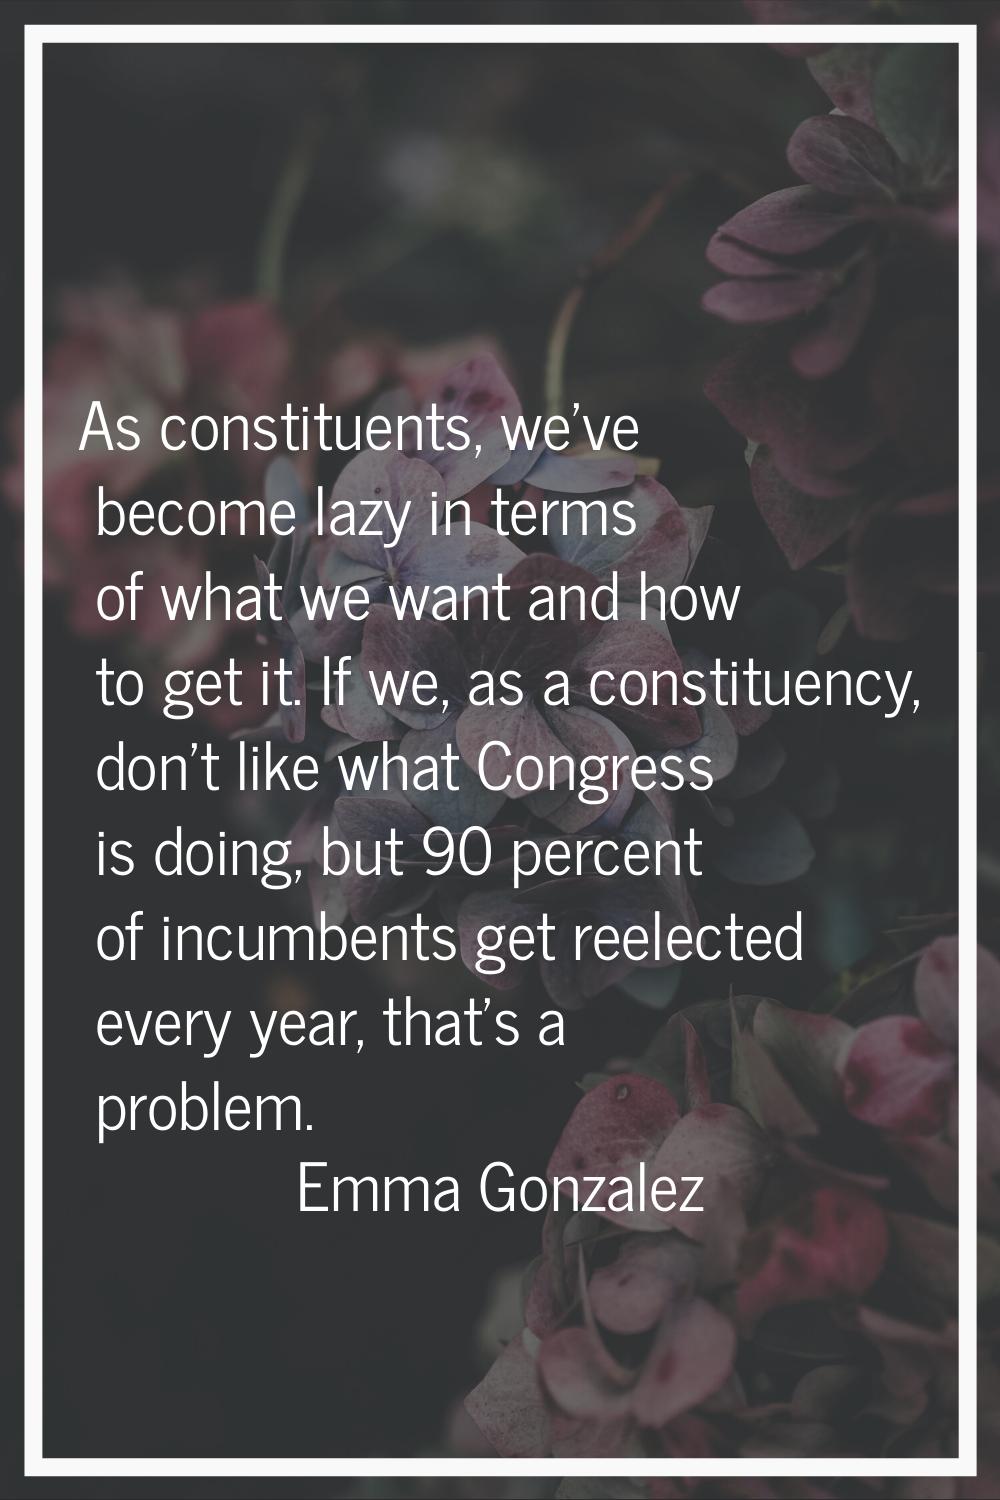 As constituents, we've become lazy in terms of what we want and how to get it. If we, as a constitu